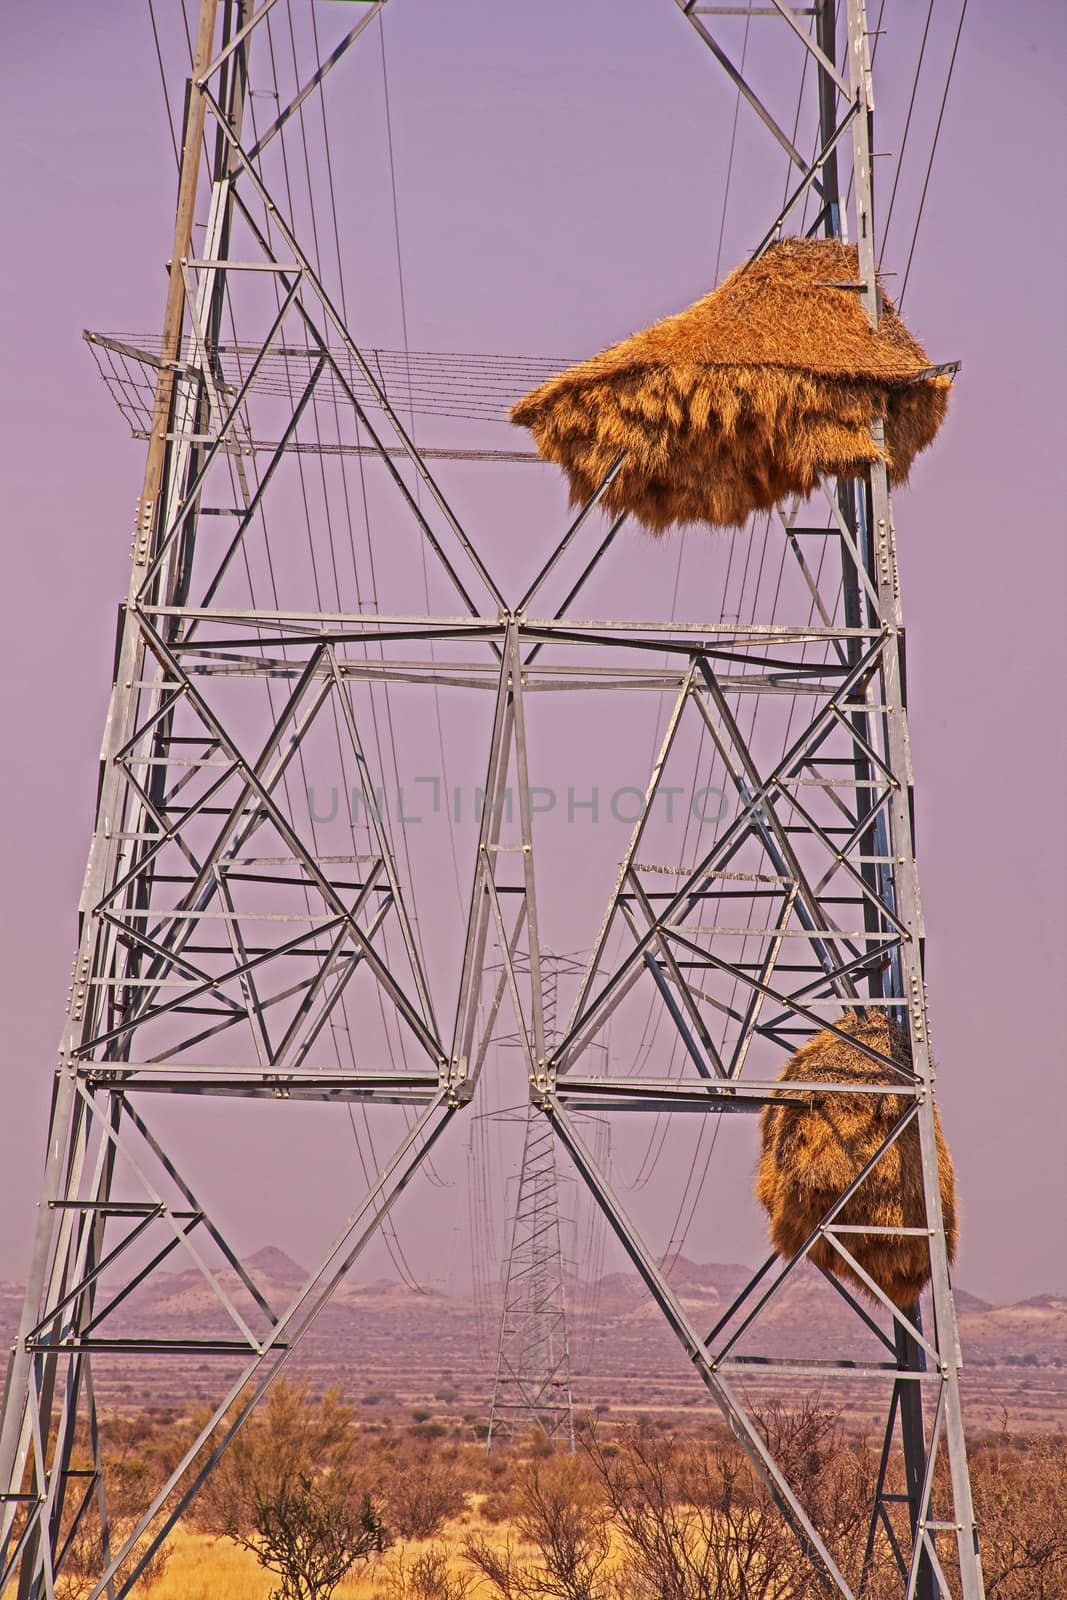 Electical pylon used for nesting purposes by Socialble Weavers (Phileairus socius) in Southern Namibia (IMG 4060)